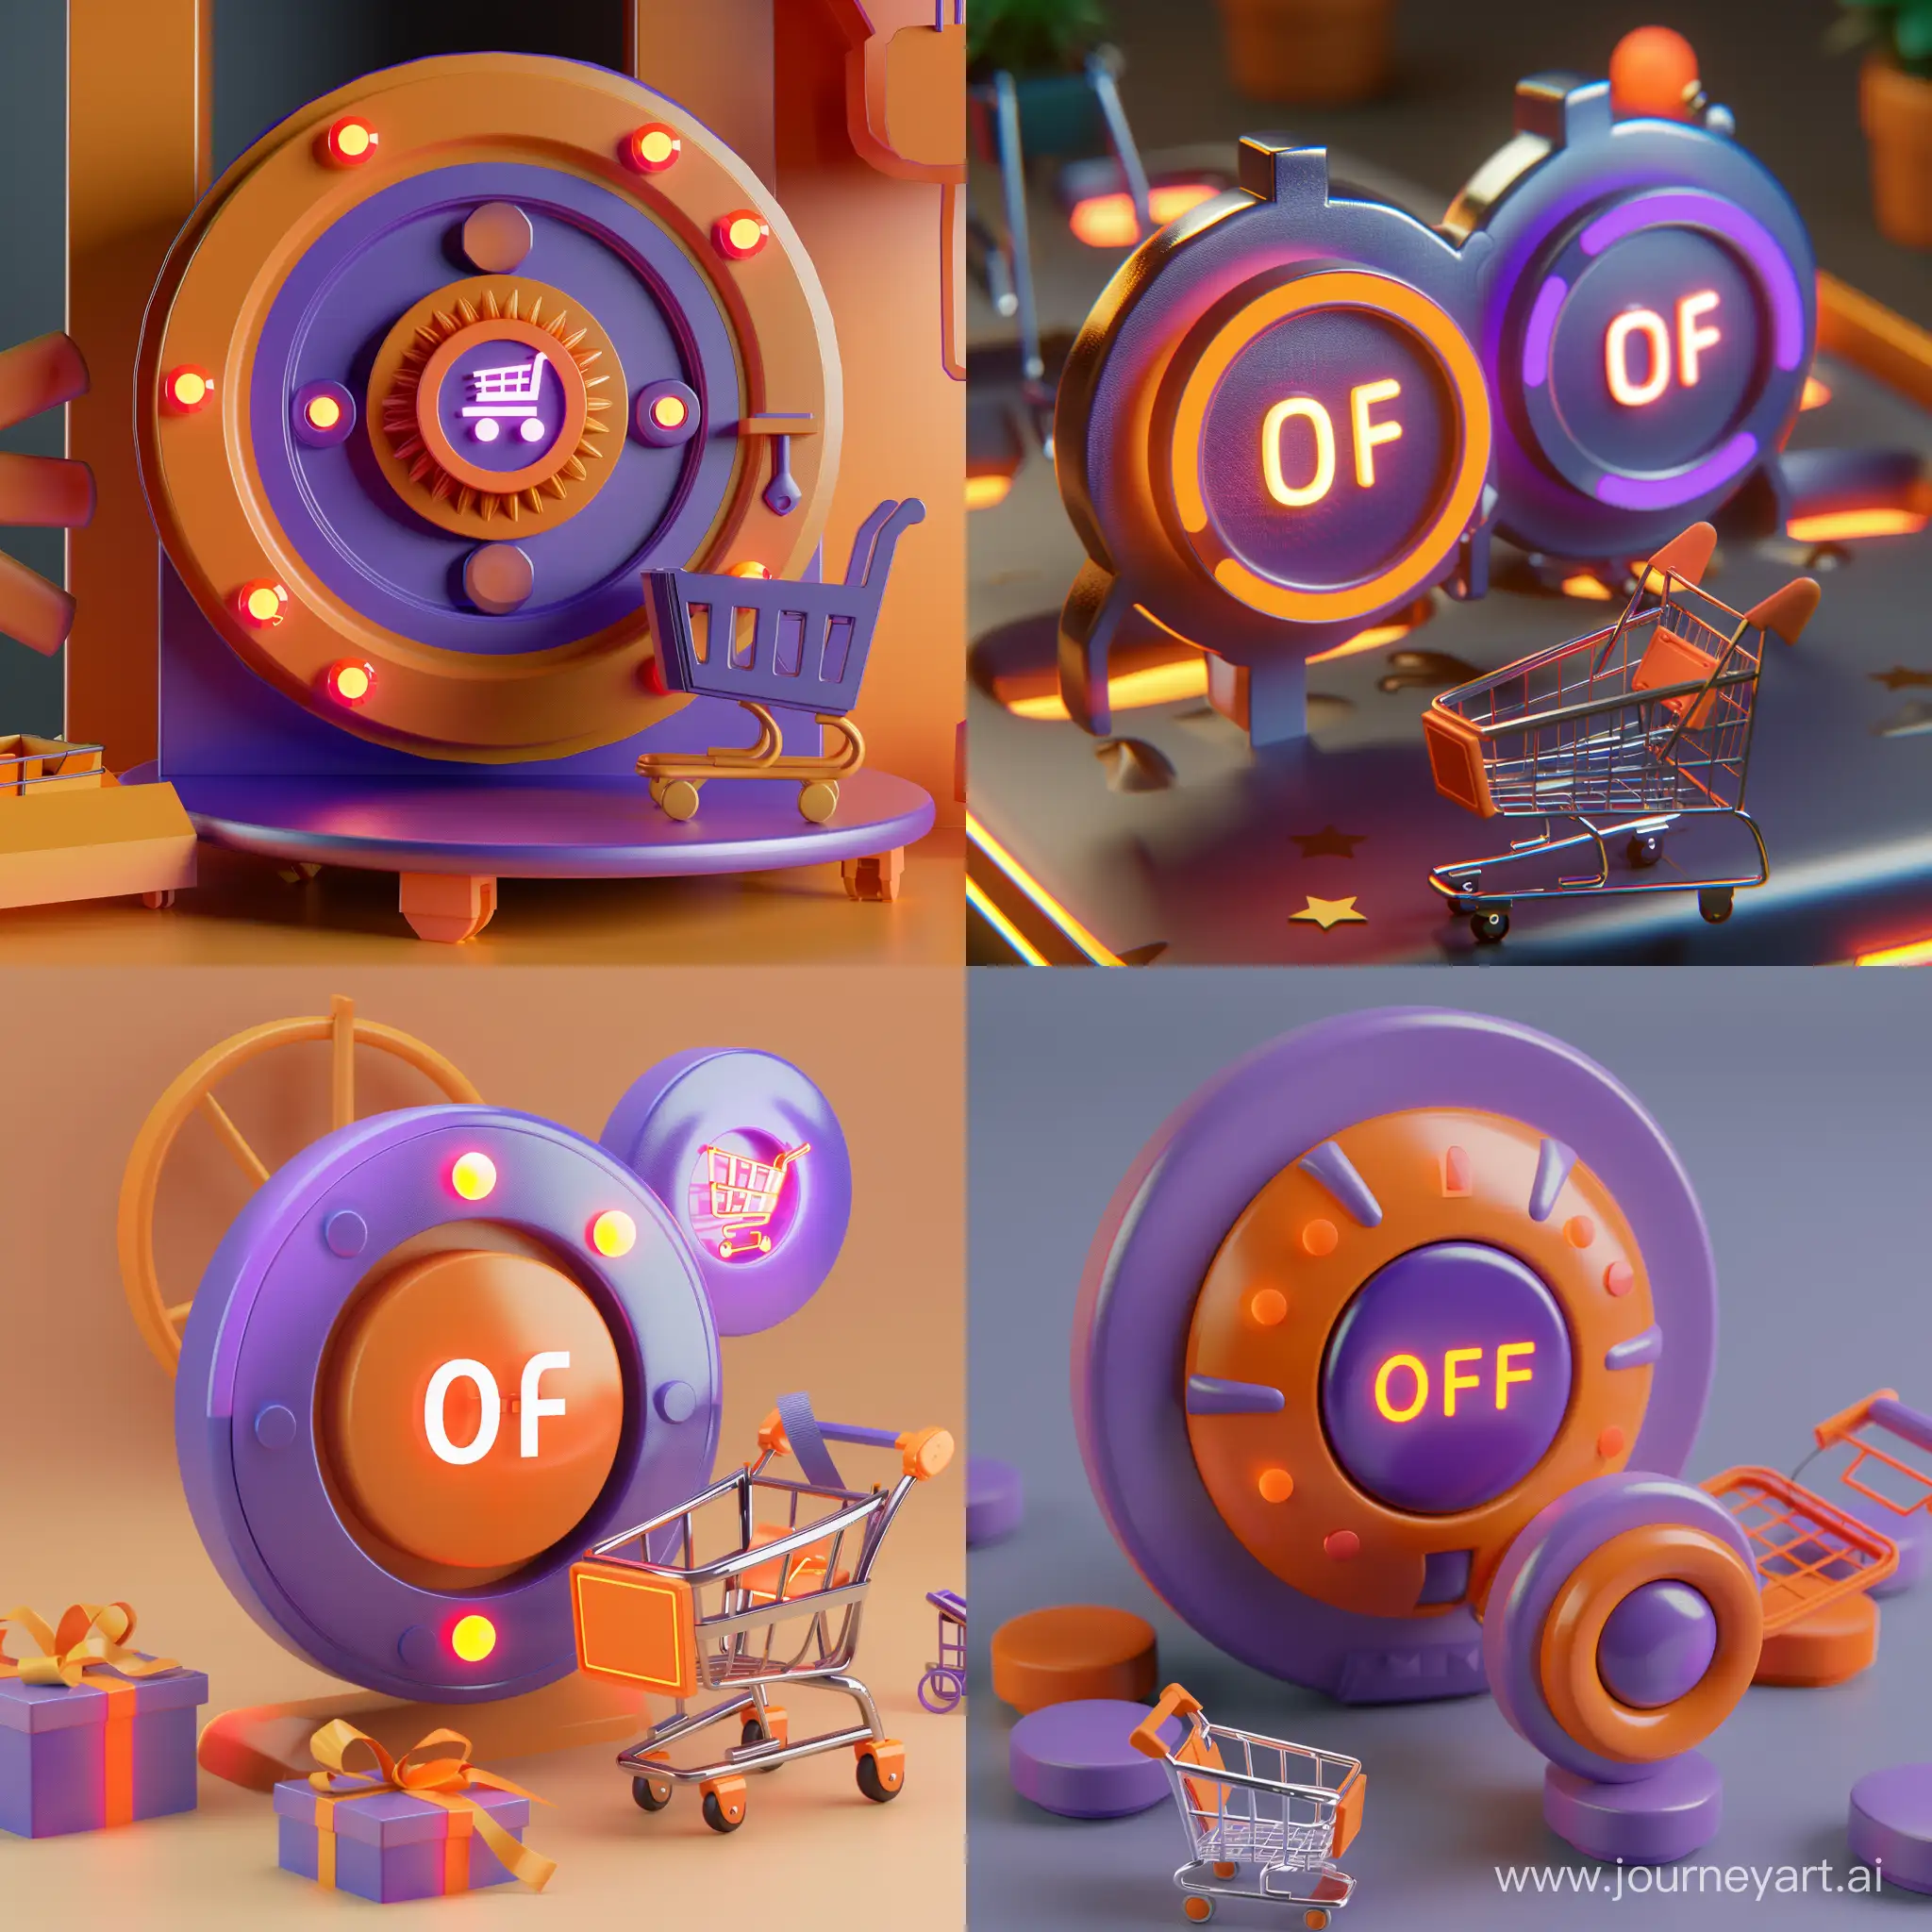 3D rendering that in the center of the image is the on and off button, one of which is orange and the other button is purple, which has lighting and has an orange and purple color theme, and there is a small shopping cart around it.